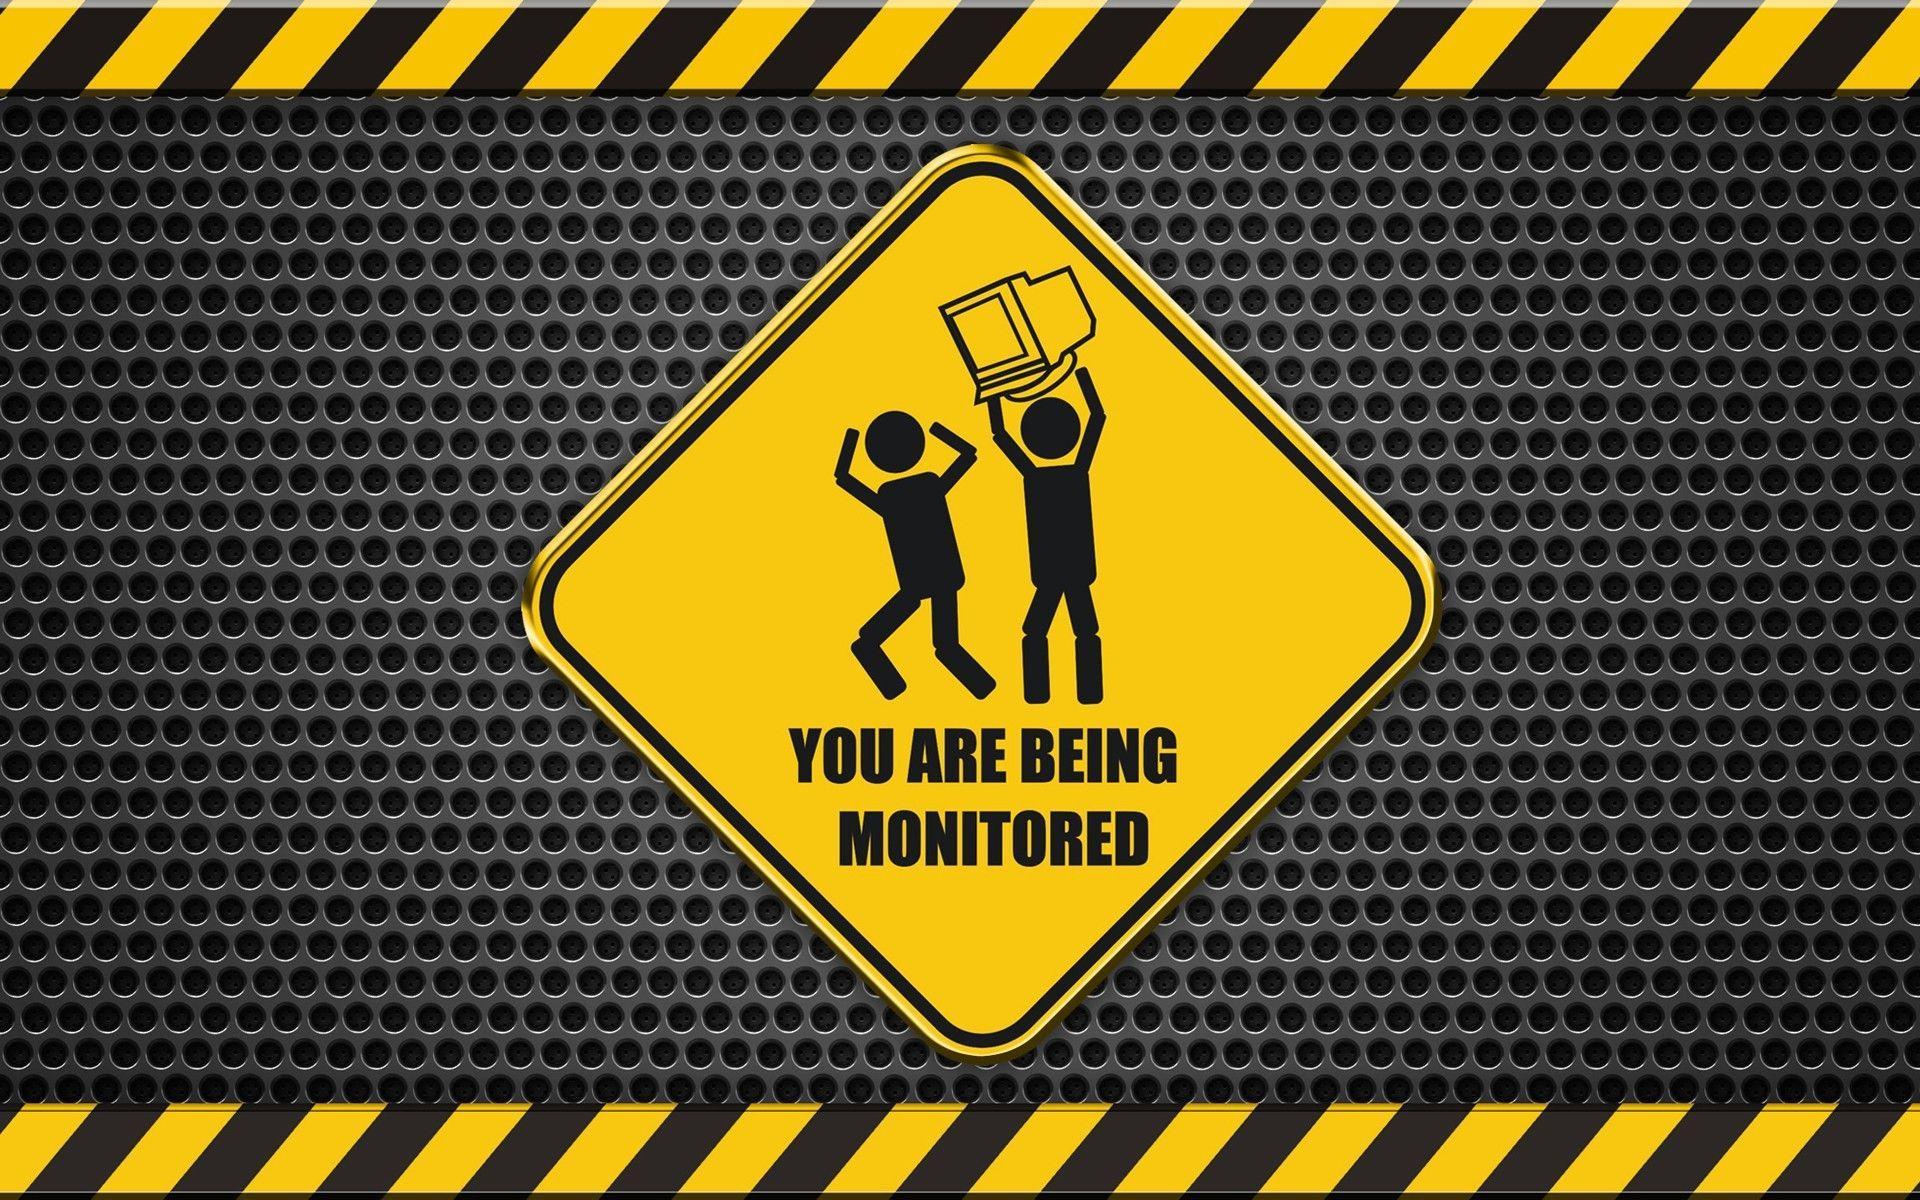 Funny Warning Wallpapers Wallpaper Cave